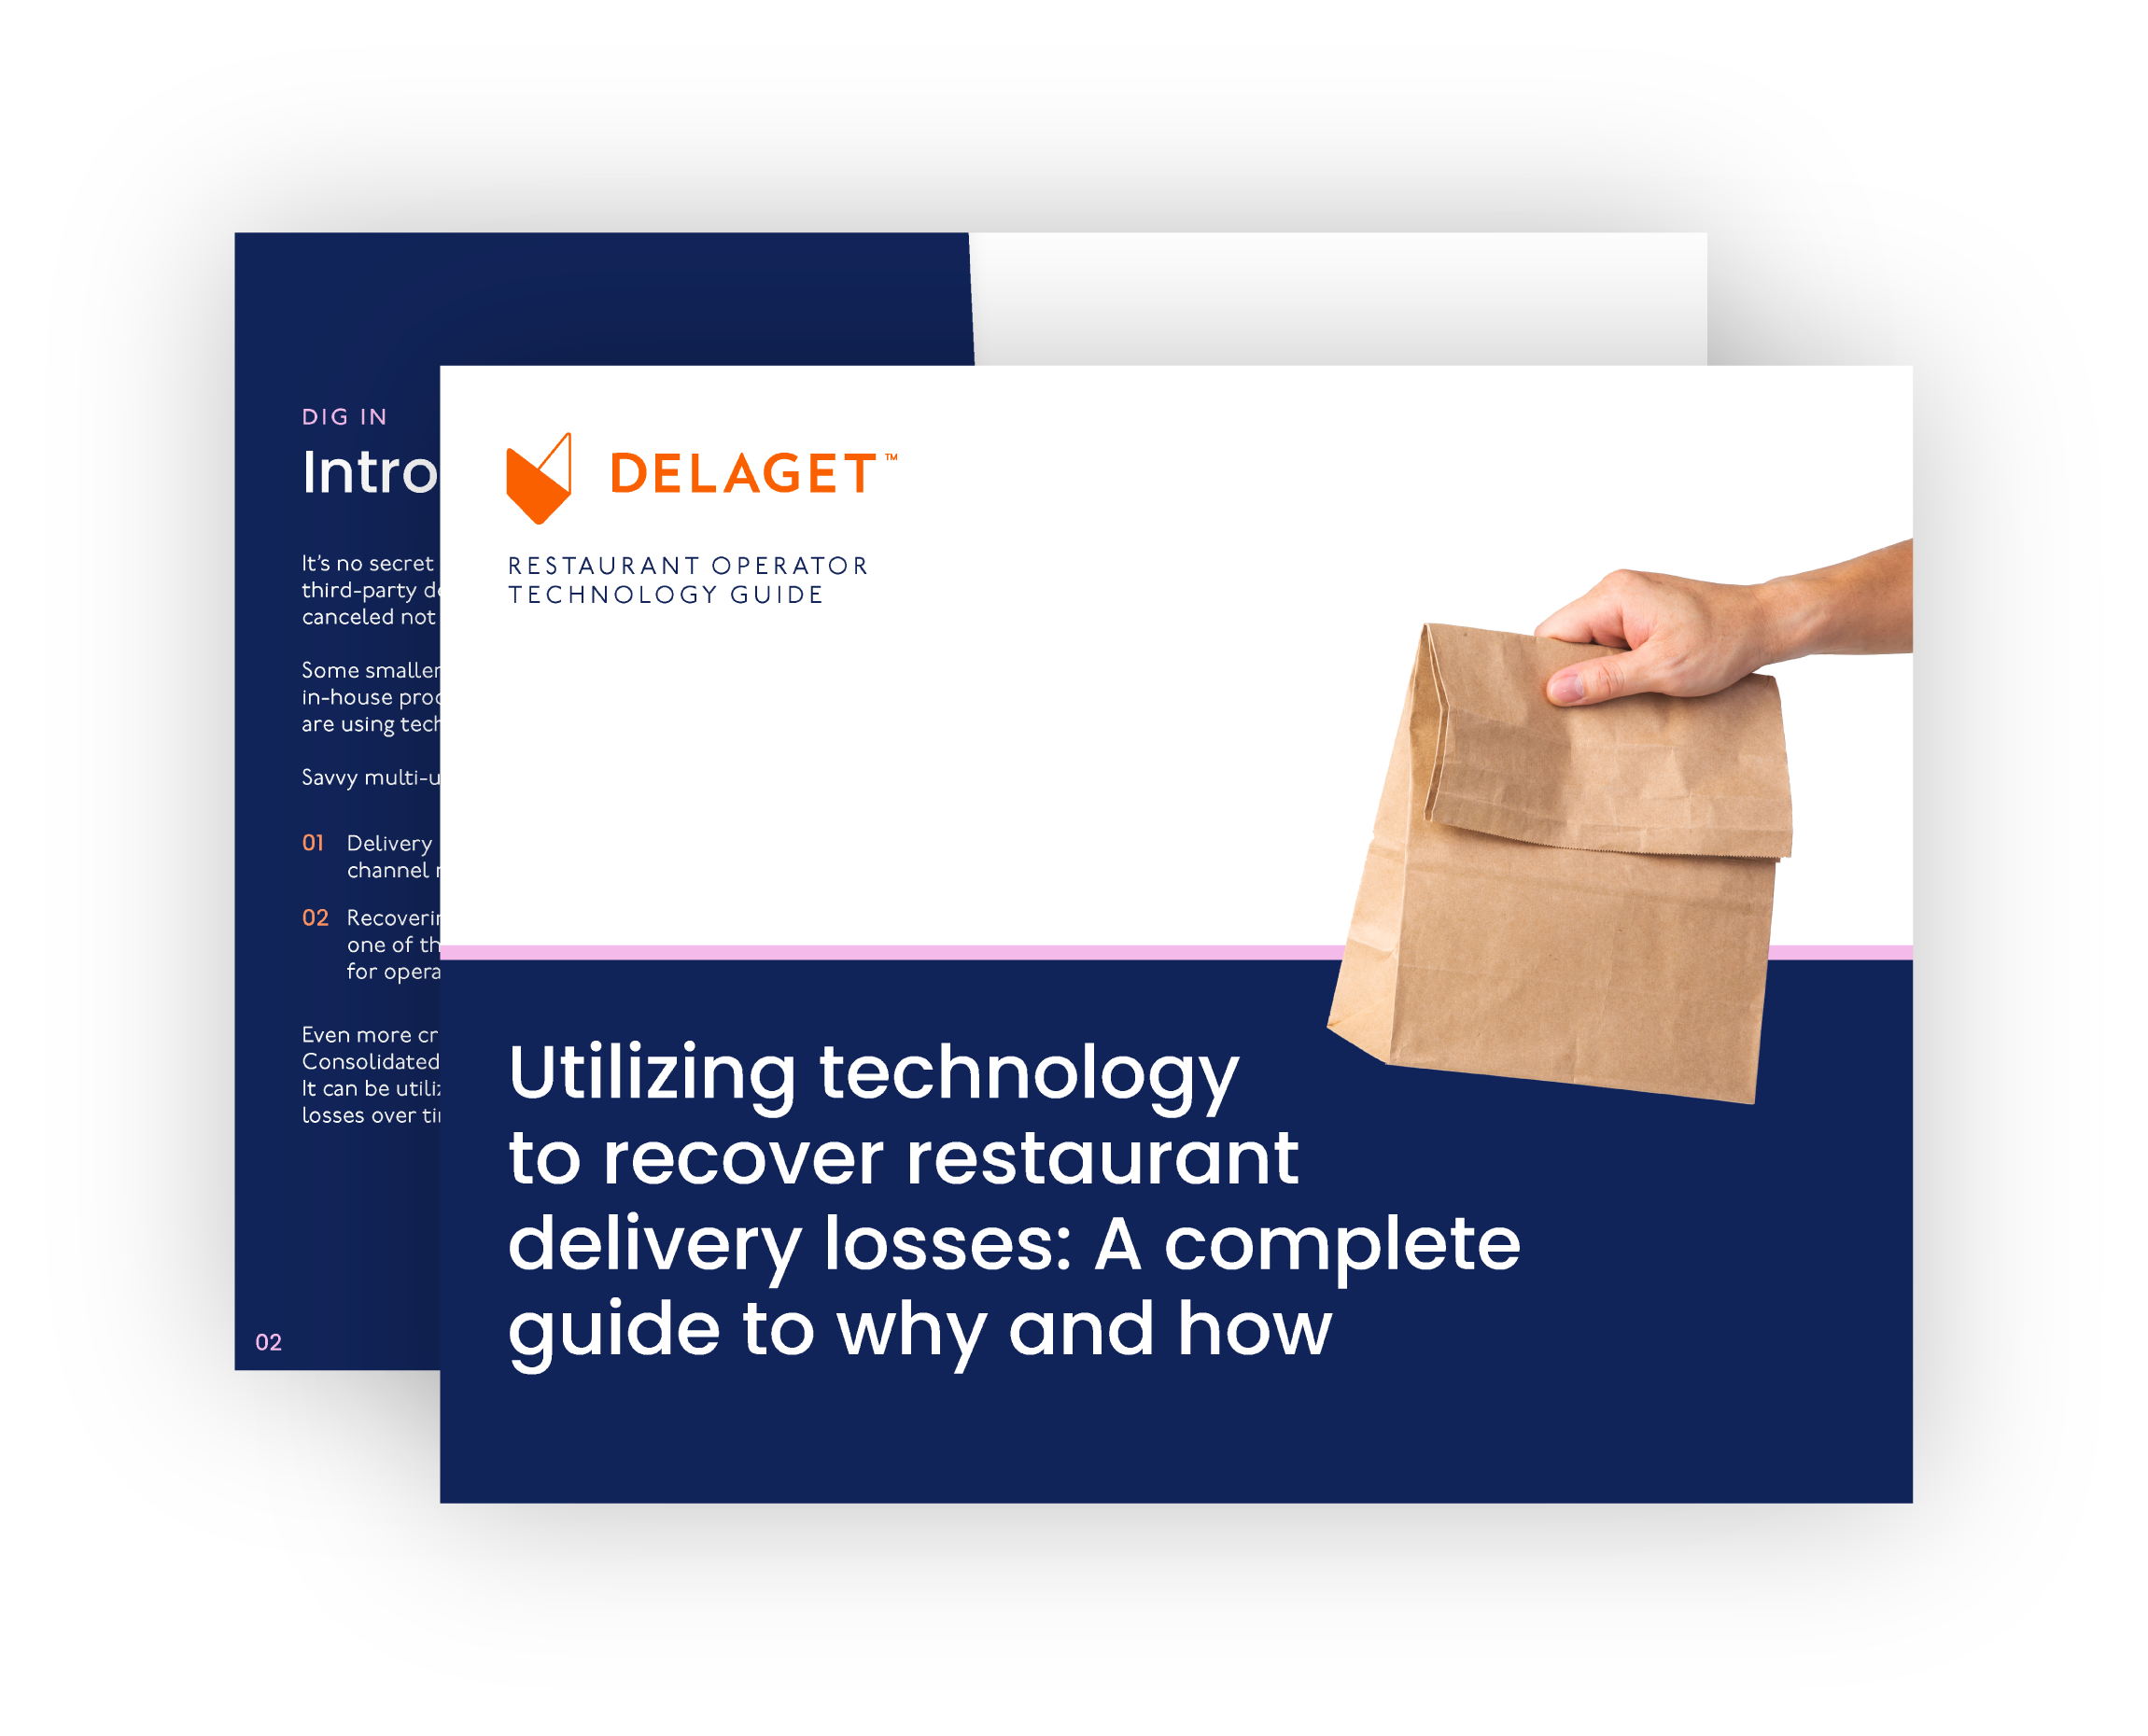 Utilizing technology to recover restaurant delivery losses: A complete guide to why and how